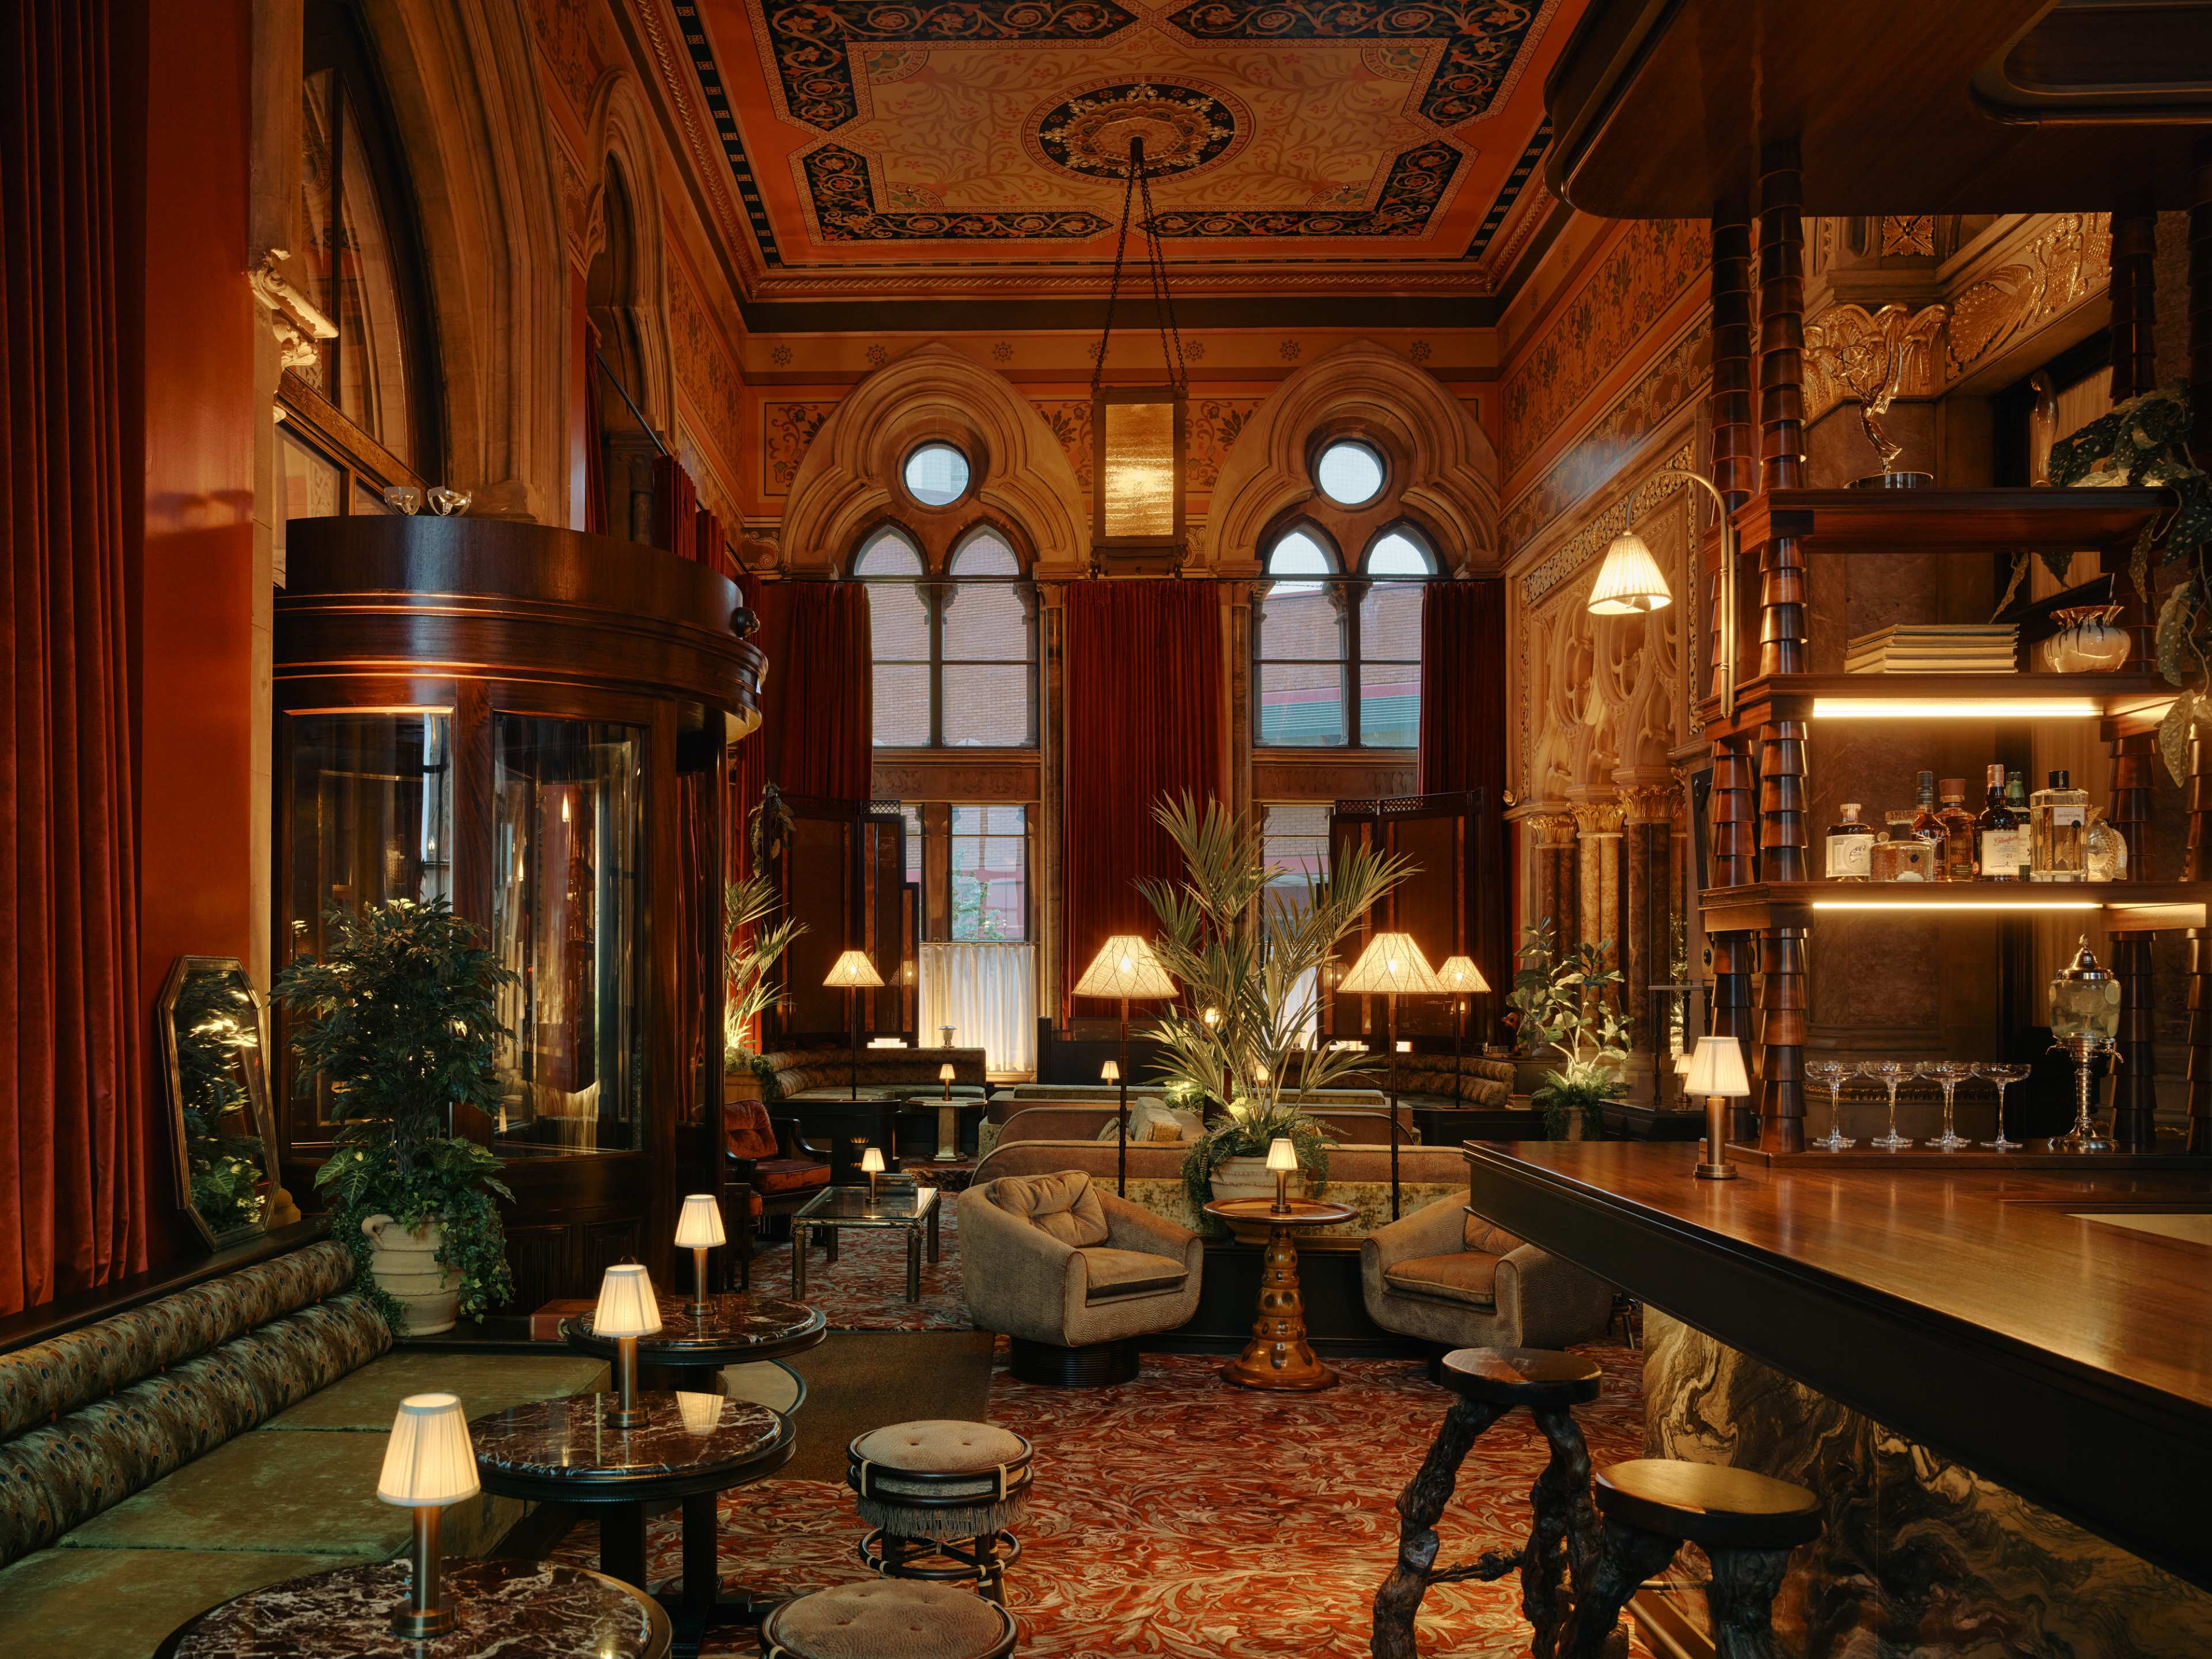 The gothic bar from The Midland Grand Dining Room.